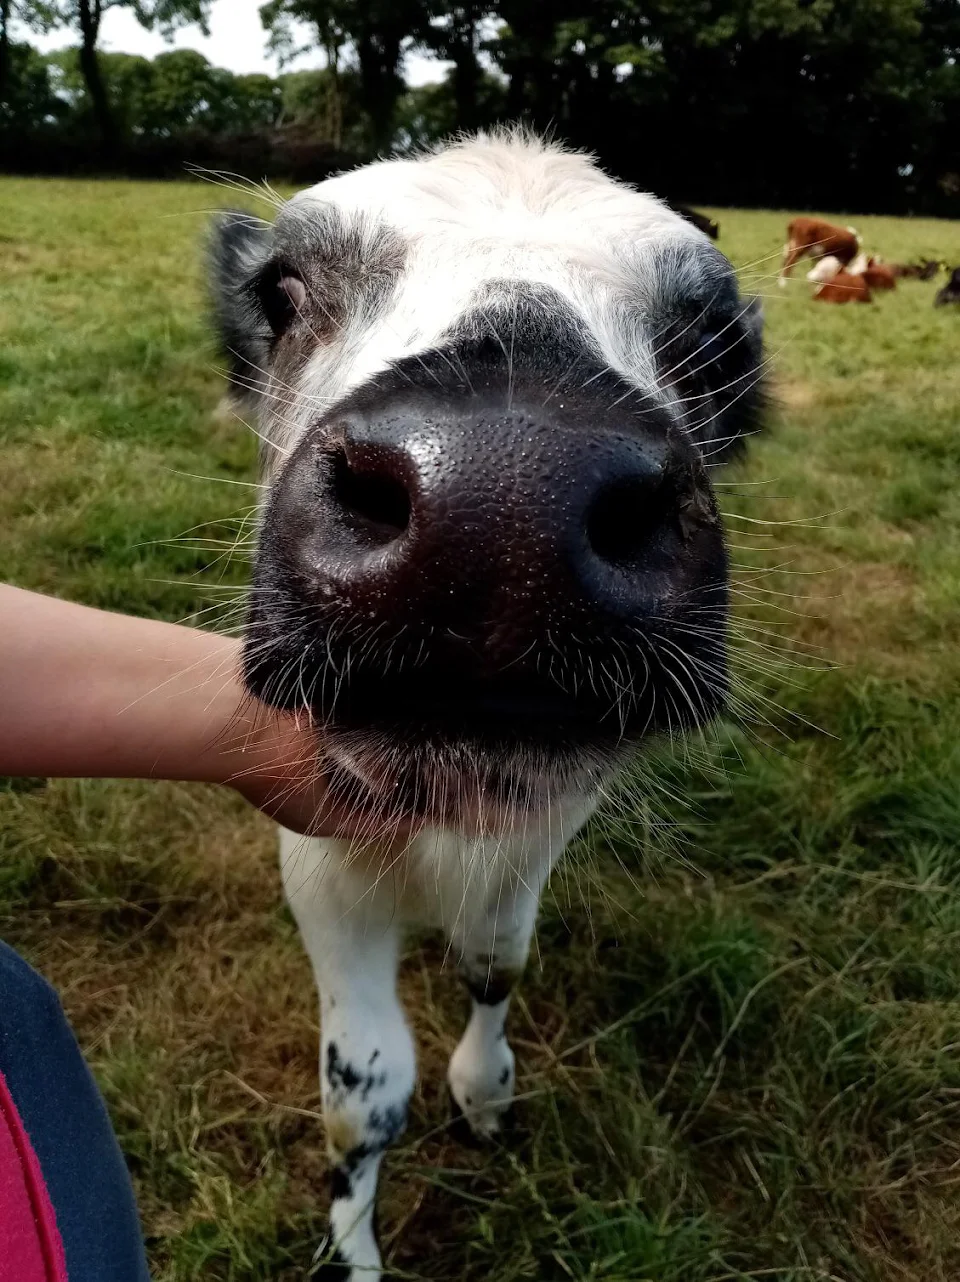 Marble wanting a boop